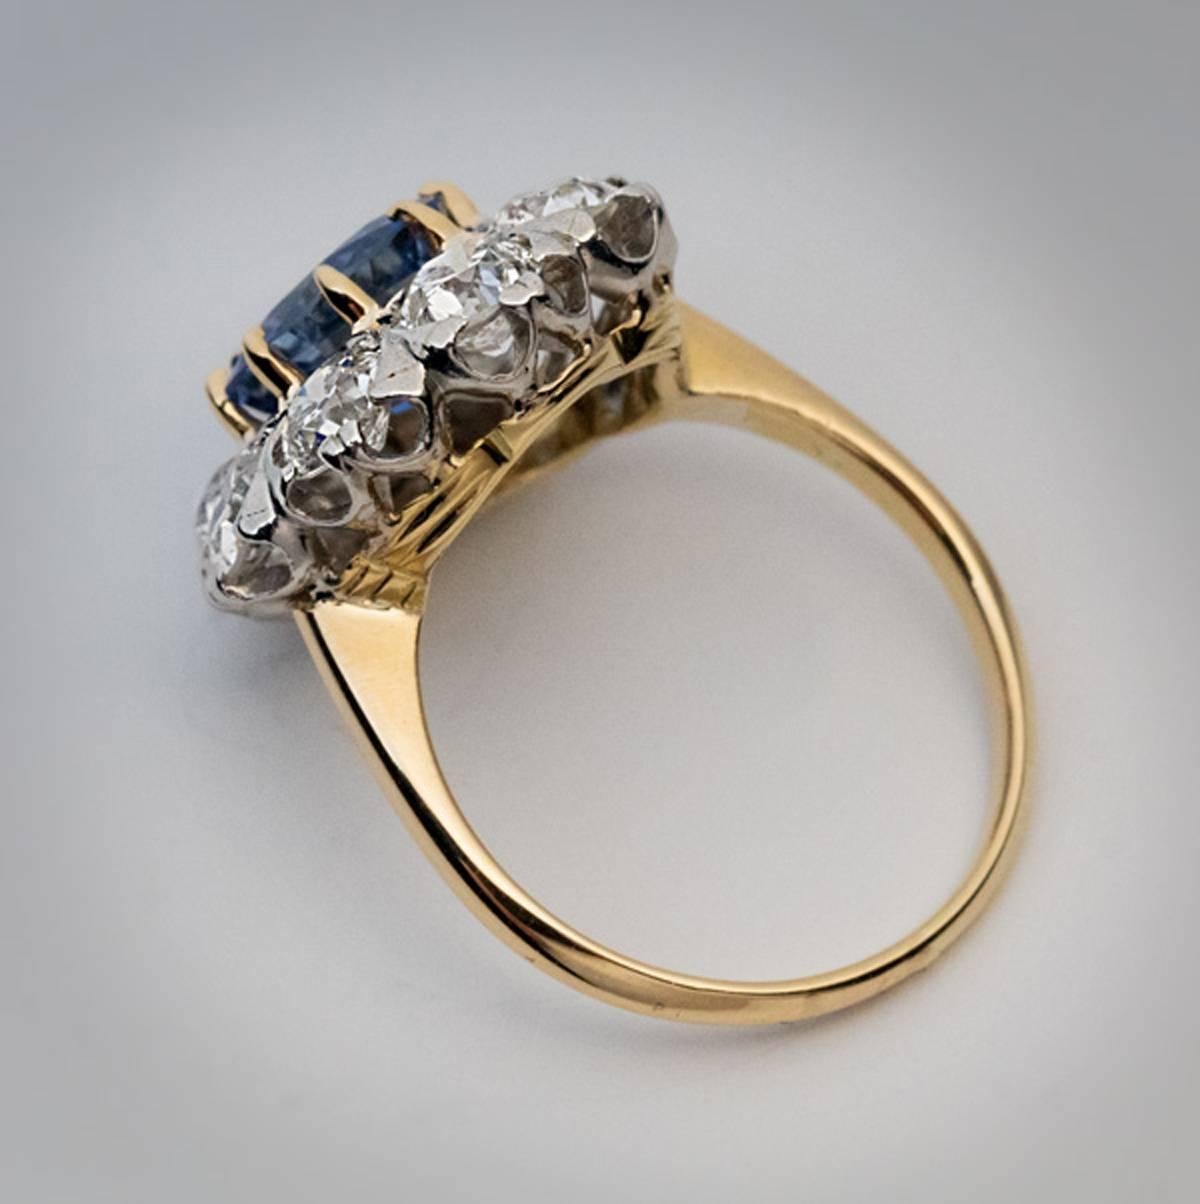 Circa 1910

An antique 18K gold and platinum engagement ring is centered with a 2.24 ct natural blue sapphire surrounded by sparkling bright white old European cut diamonds (G-H color, VS2-SI1 clarity). Estimated total diamond weight is 2.40 ct. The